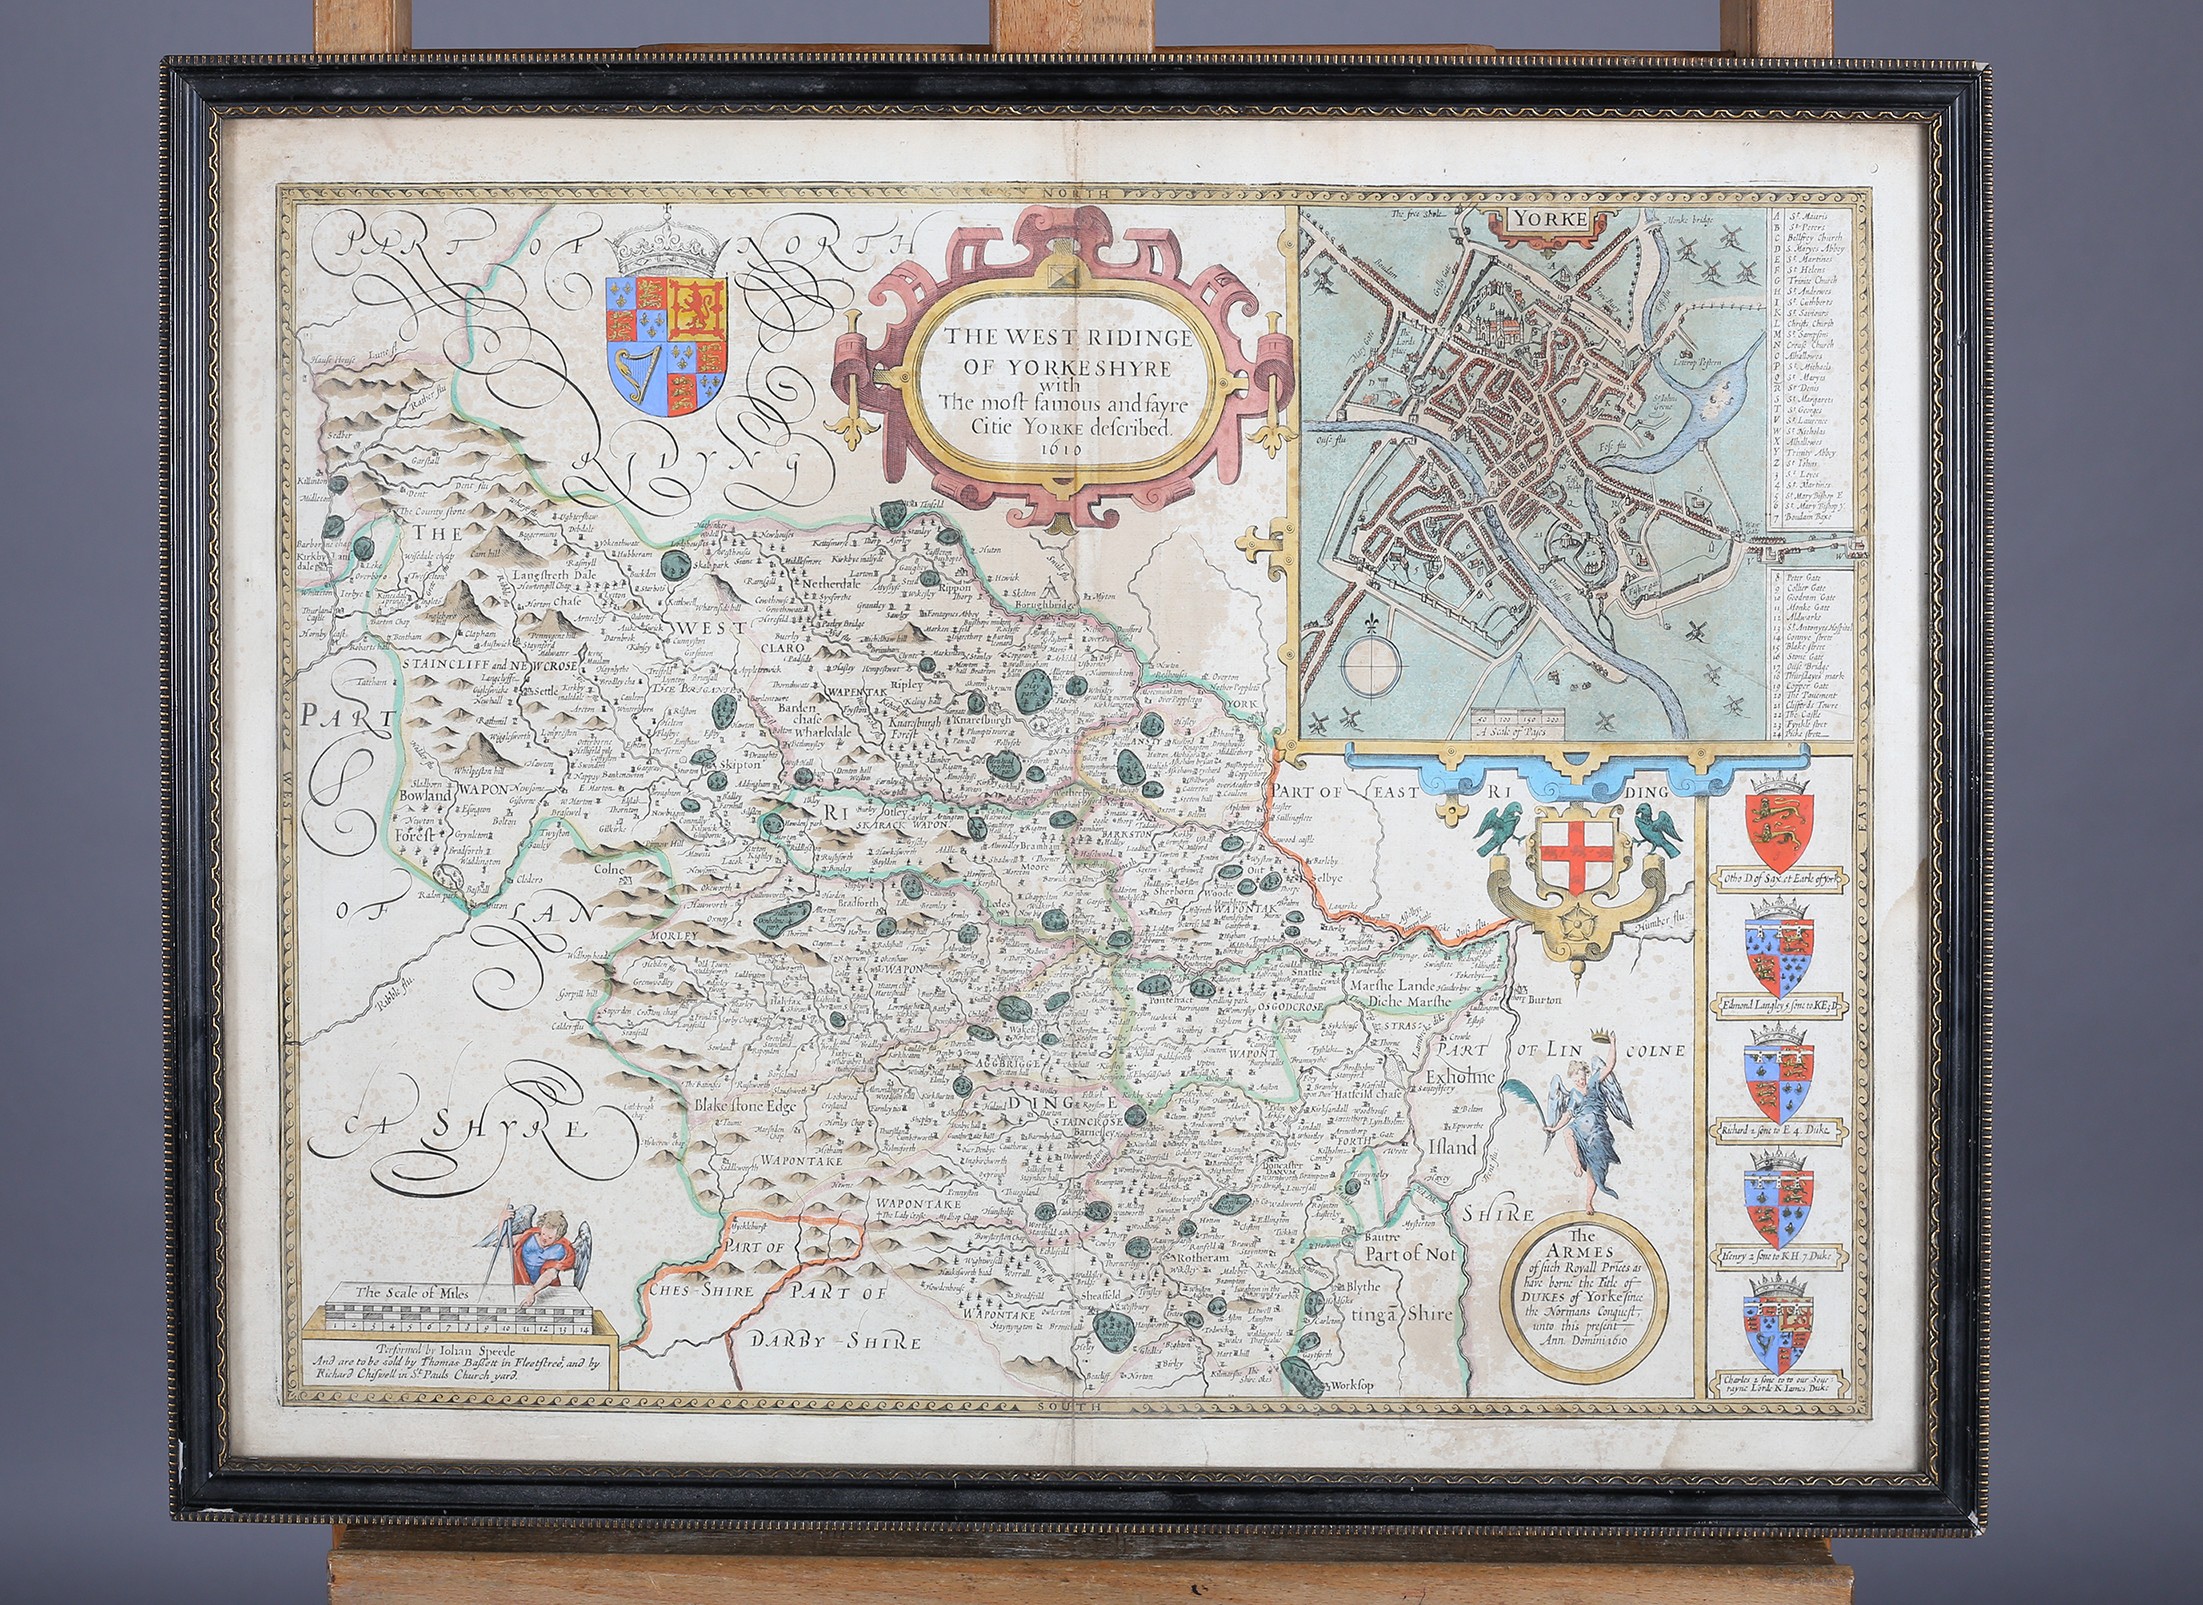 AFTER JOHN SPEED (1552-1629), The West Ridinge of Yorkshire, 1610; double page hand coloured